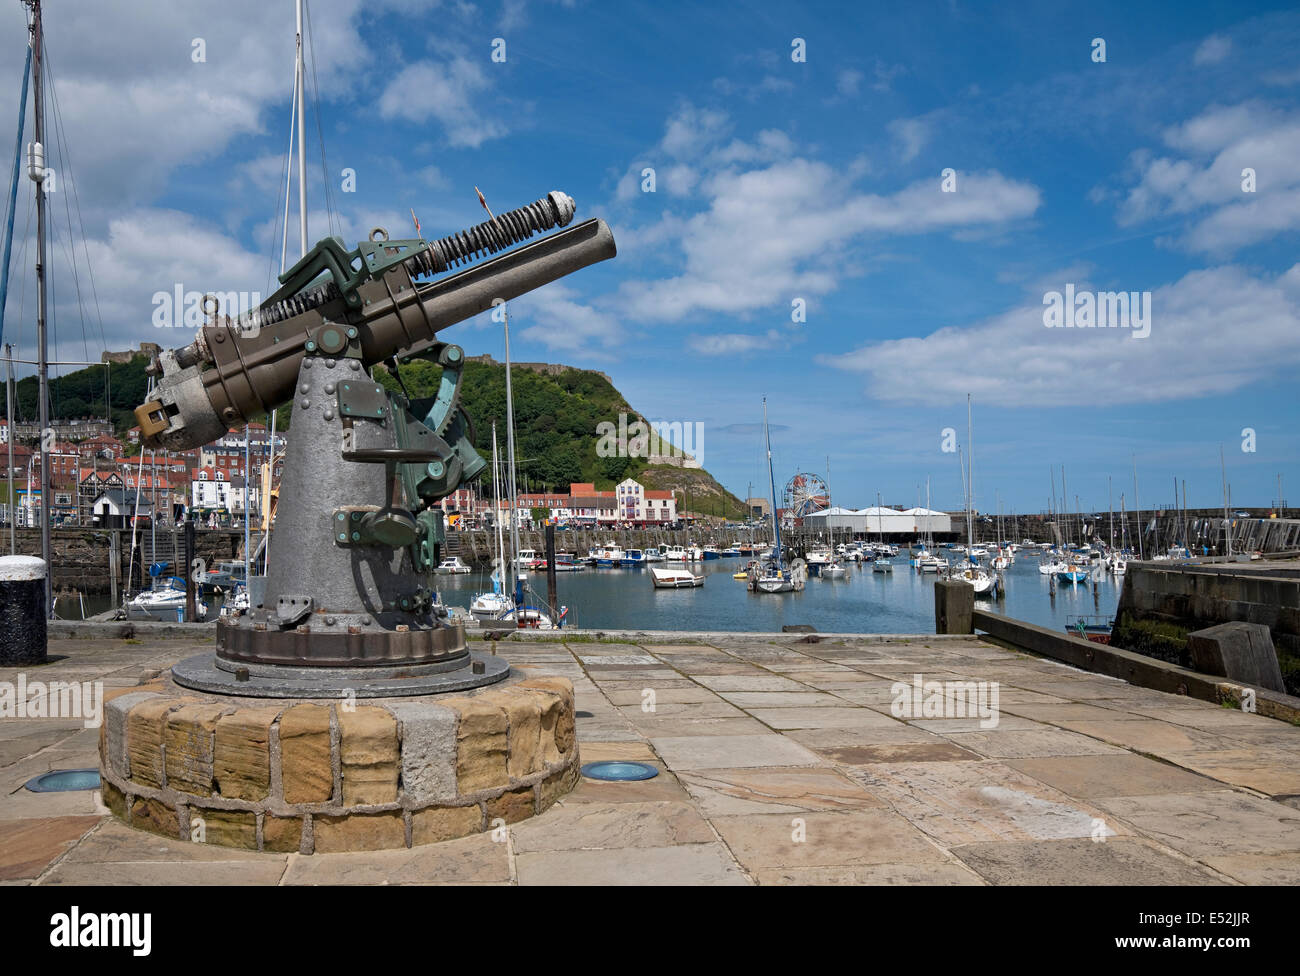 Vickers 14 pounder gun at the entrance to Scarborough Marina seafront in summer North Yorkshire England UK United Kingdom GB Great Britain Stock Photo